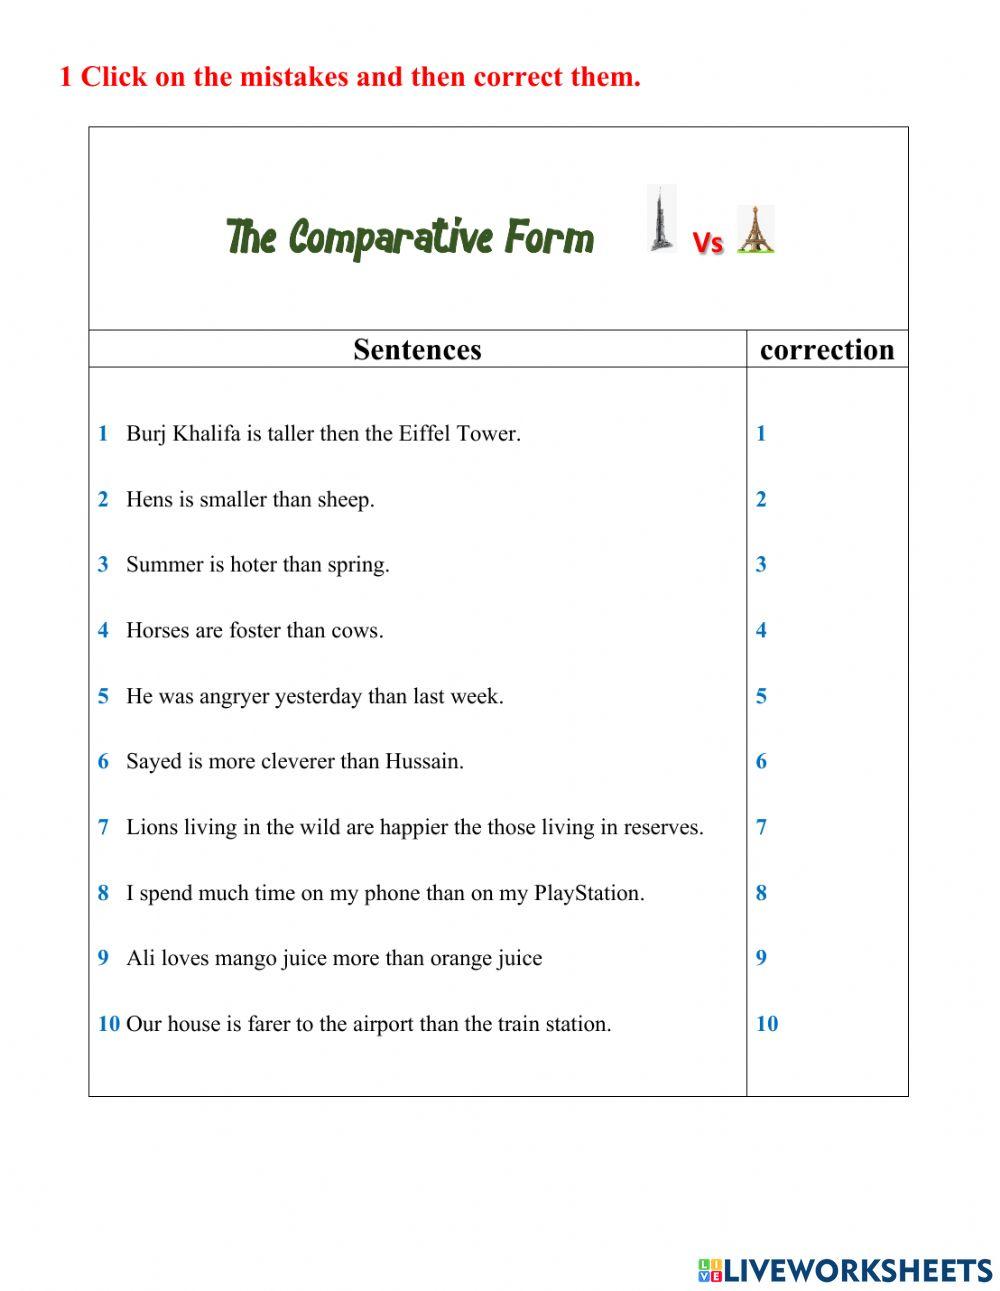 The Comparative and the Superlative Forms